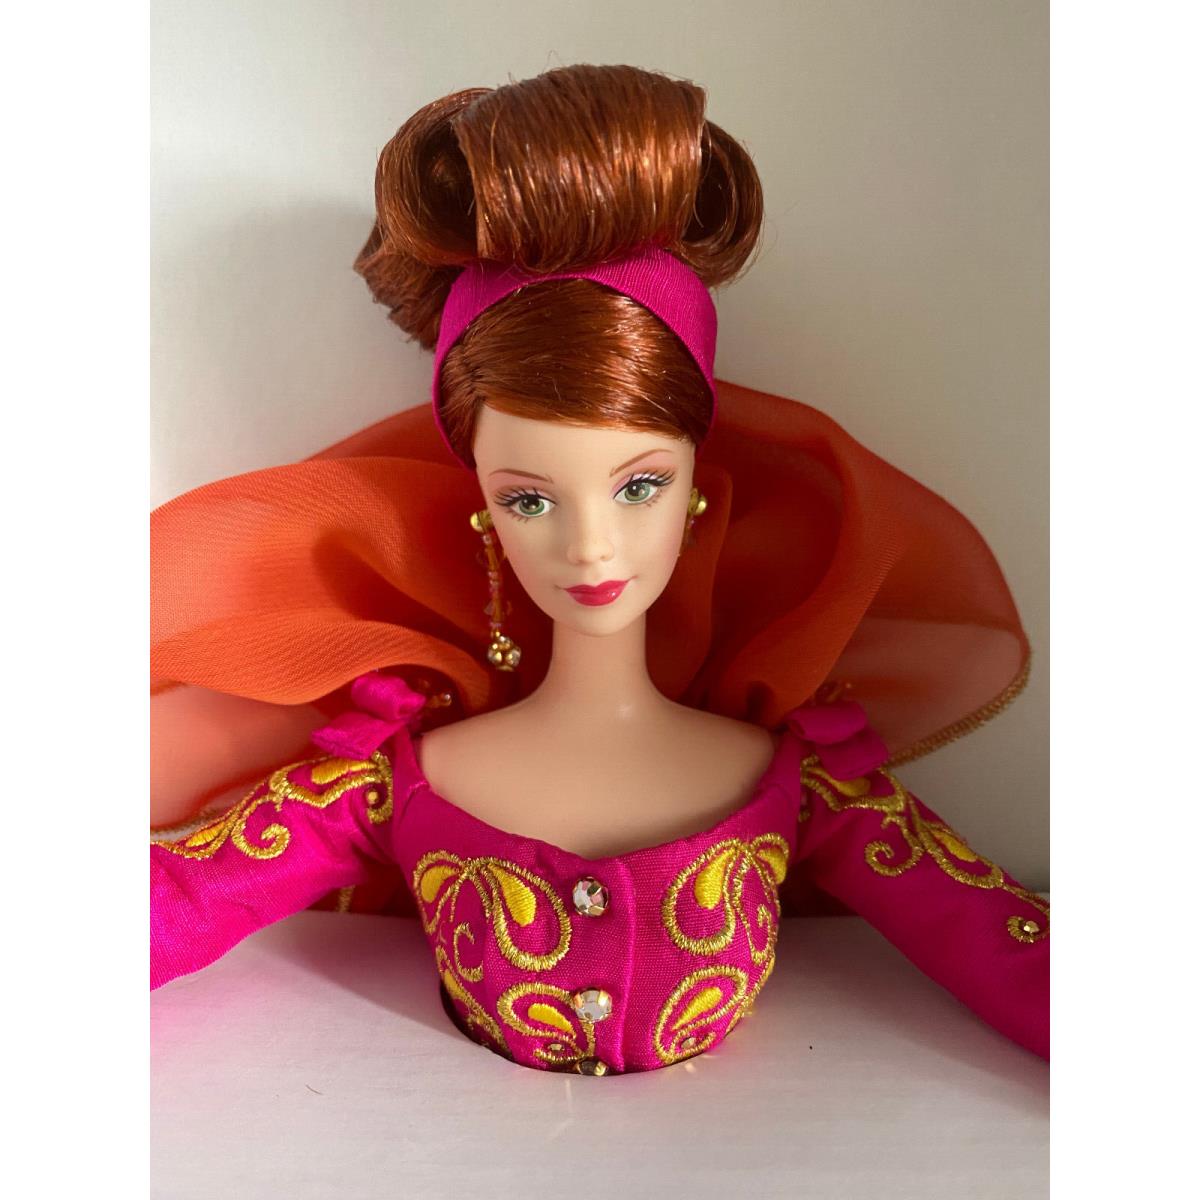 1997 Mattel Symphony In Chiffon Couture Barbie Doll 20186